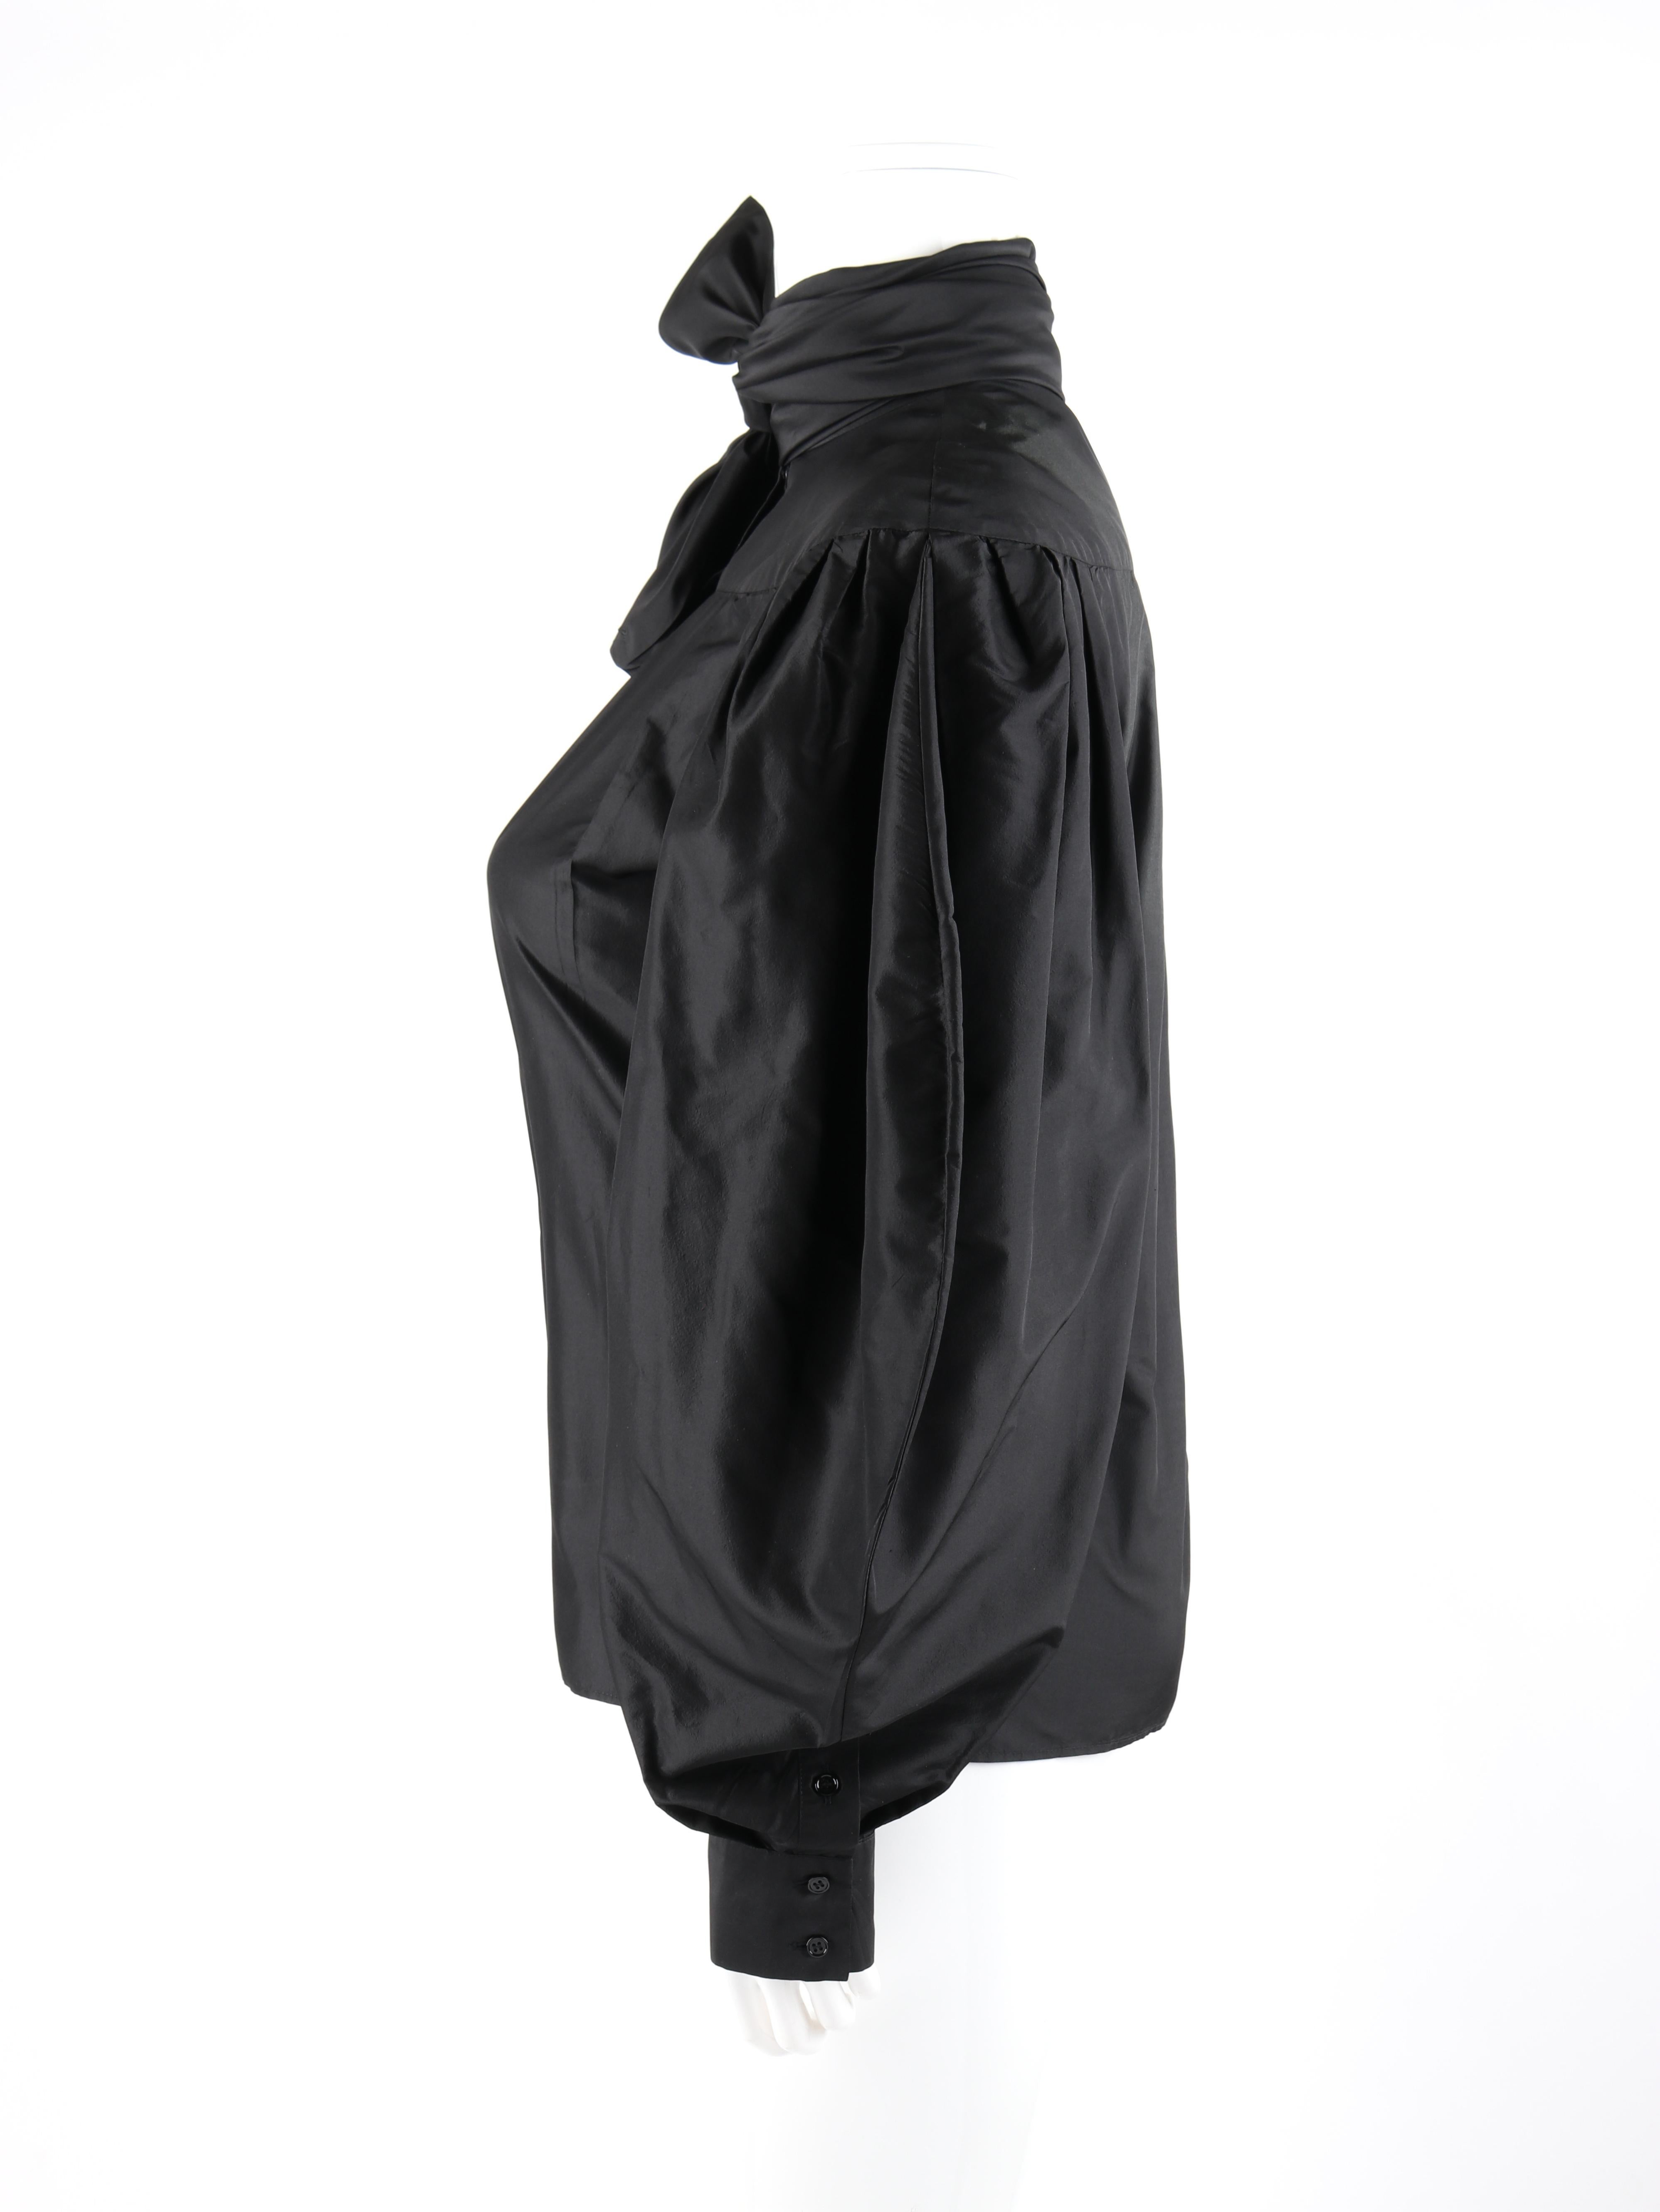 ALEXANDER McQUEEN A/W 2008 Black Silk Pleated Long Bouffant Sleeve Blouse Top In Good Condition For Sale In Thiensville, WI